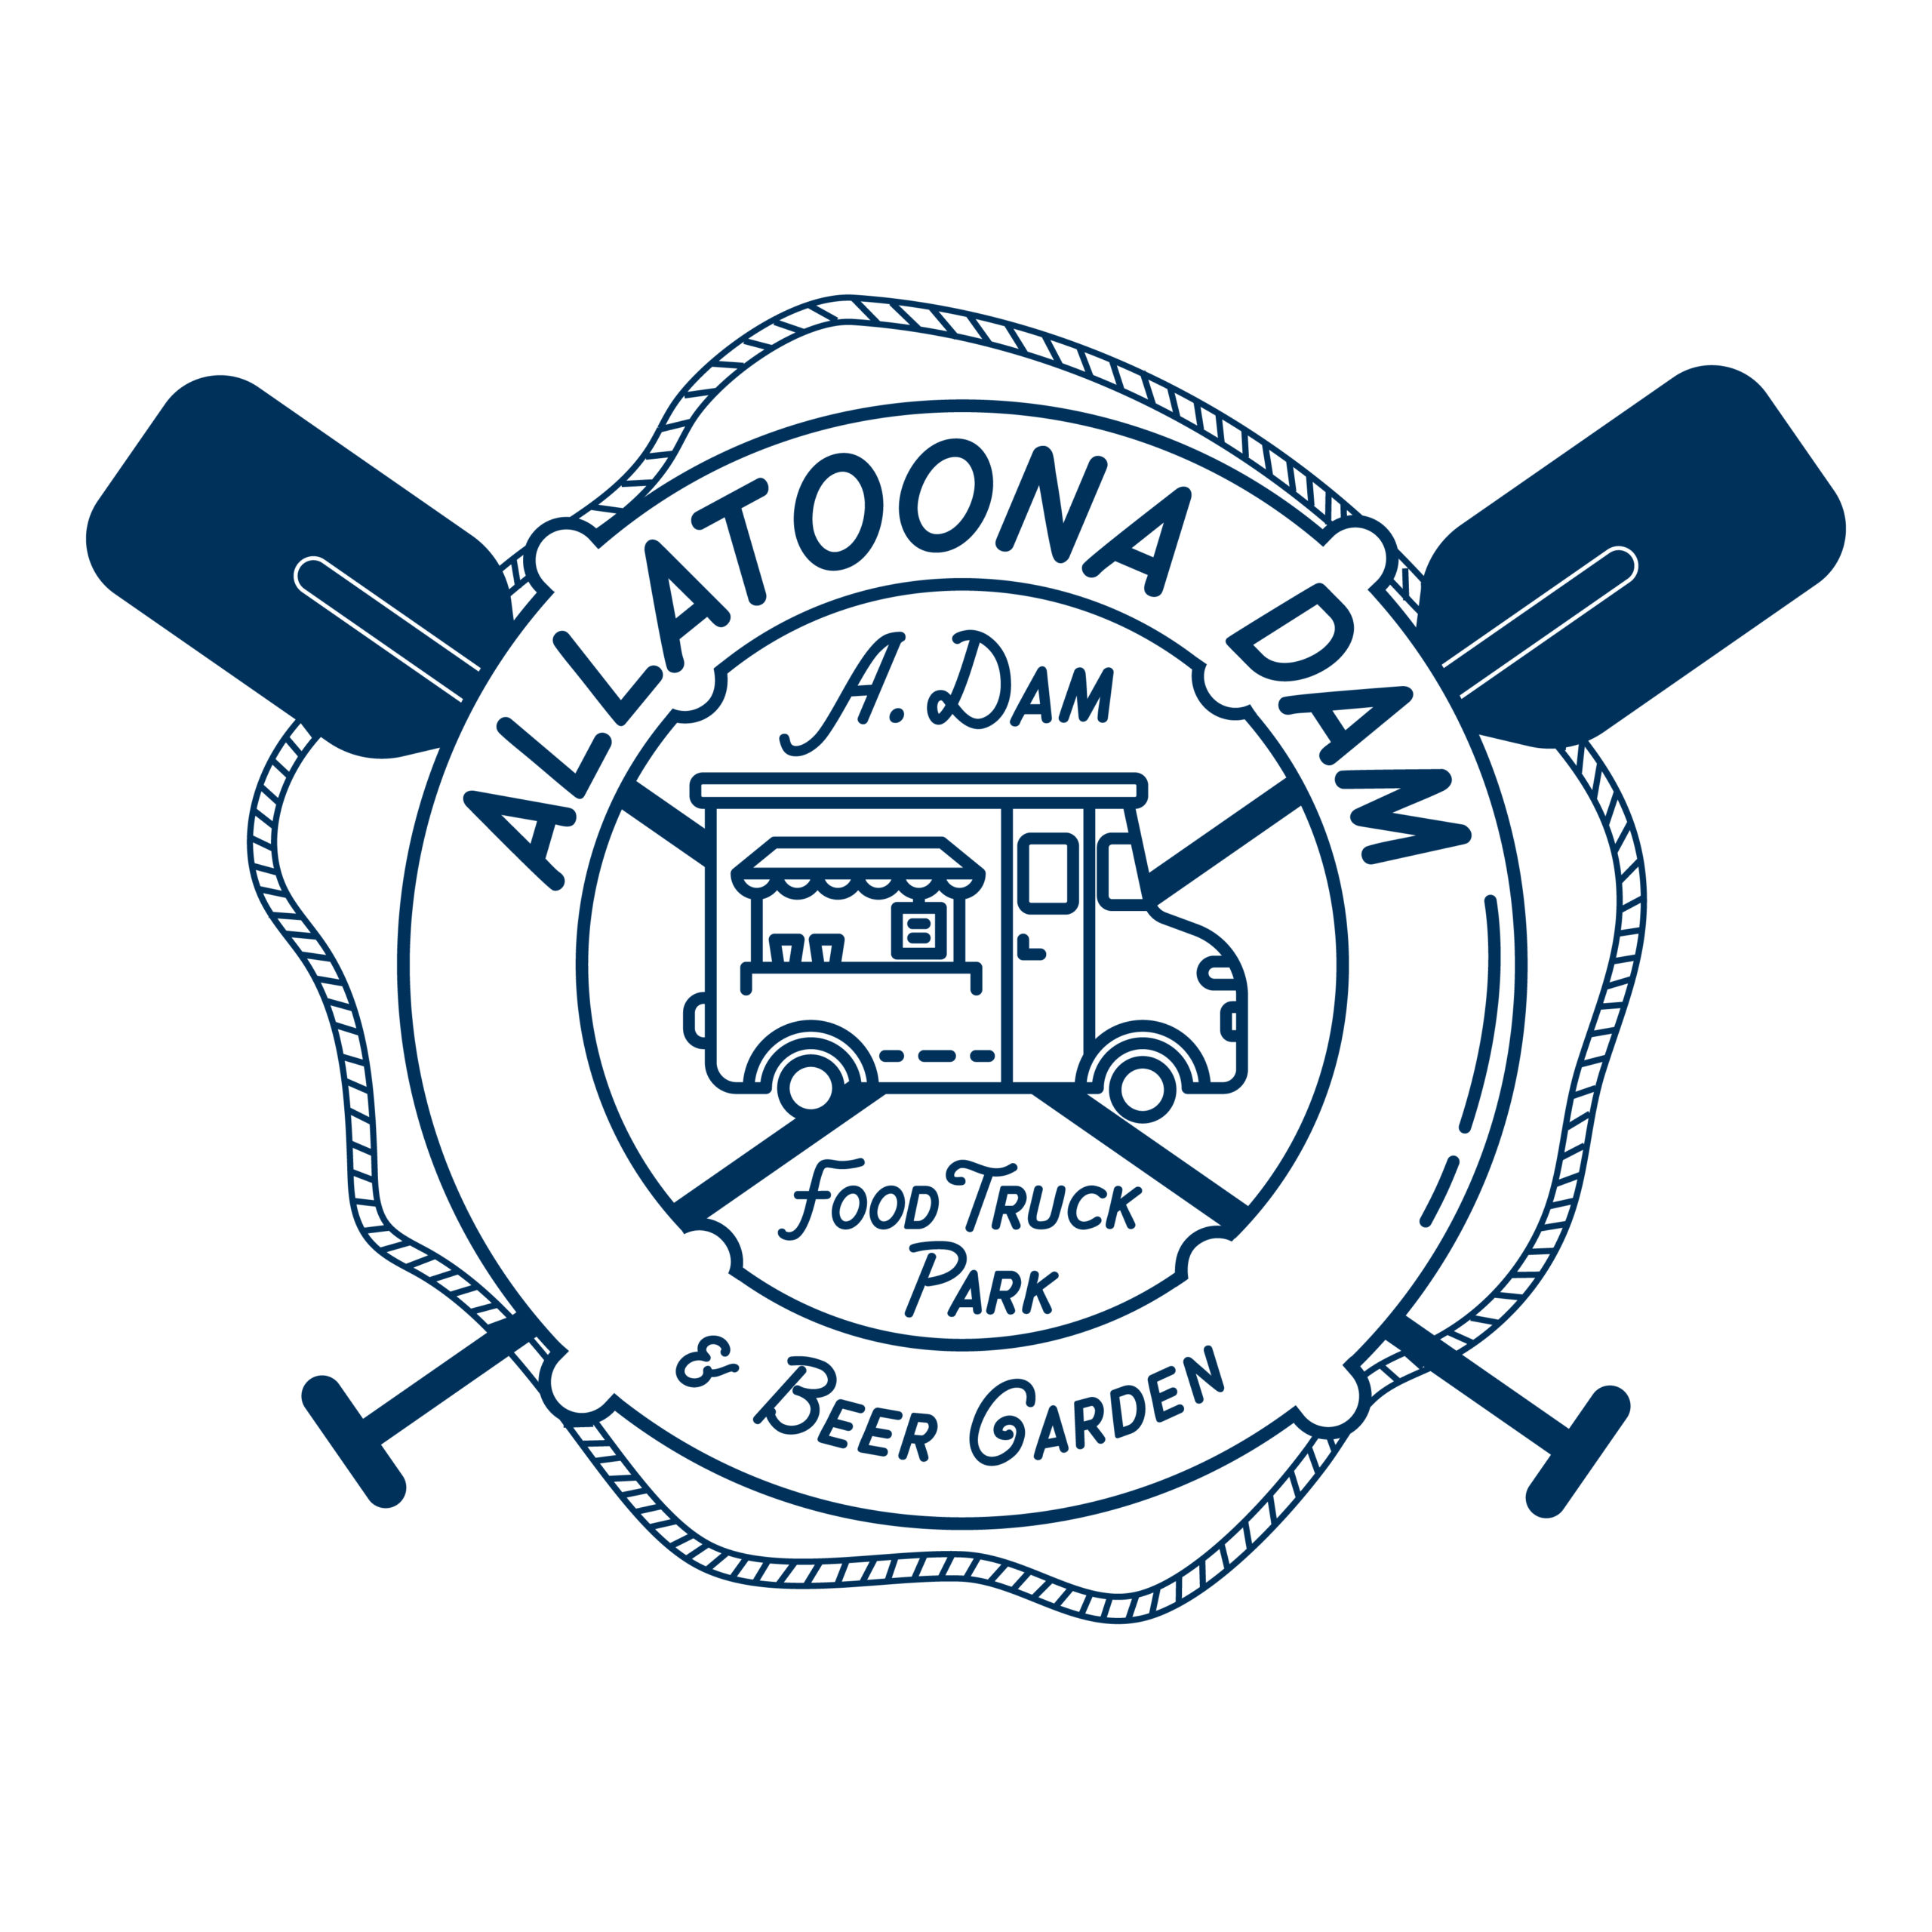 logo design for Allatoona Dam Food Truck Park featuring a life preserver and oars around a food truck